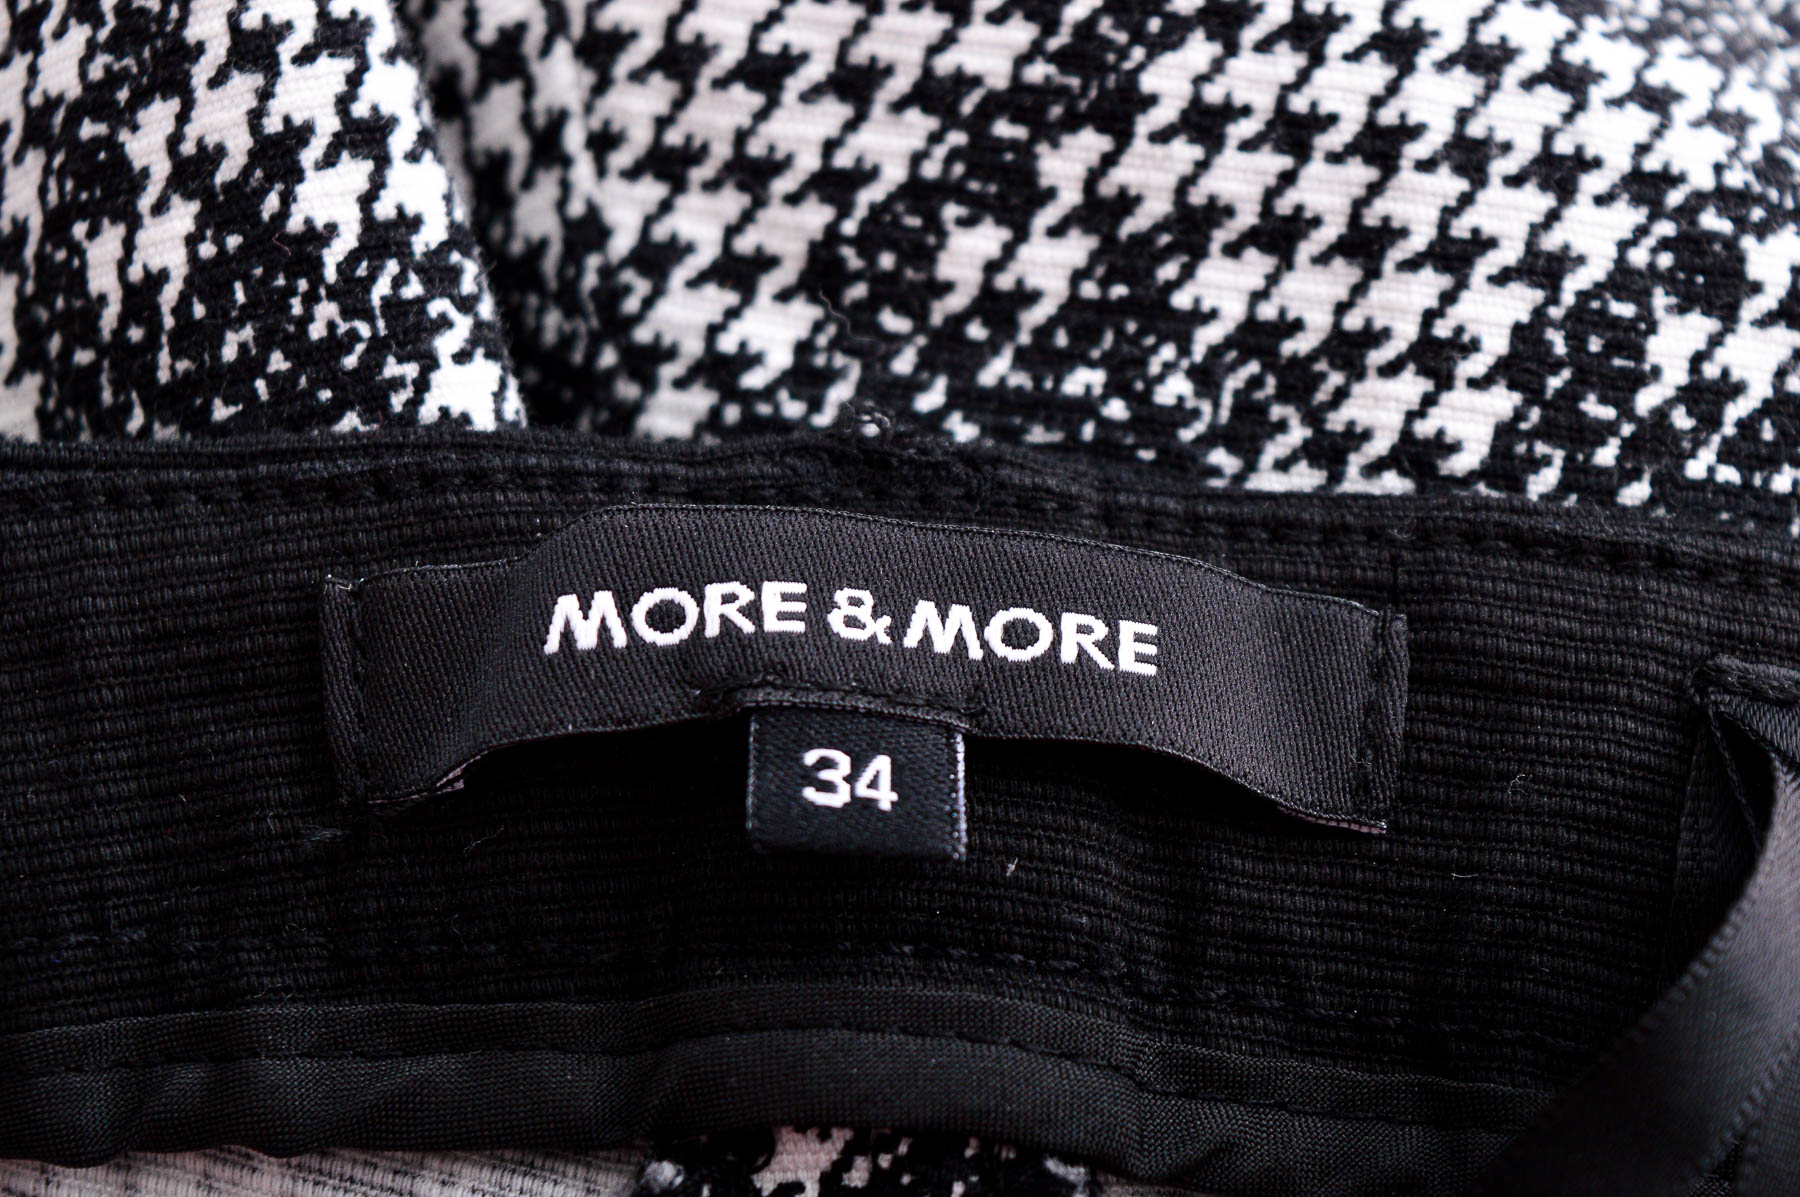 Women's trousers - More & More - 2